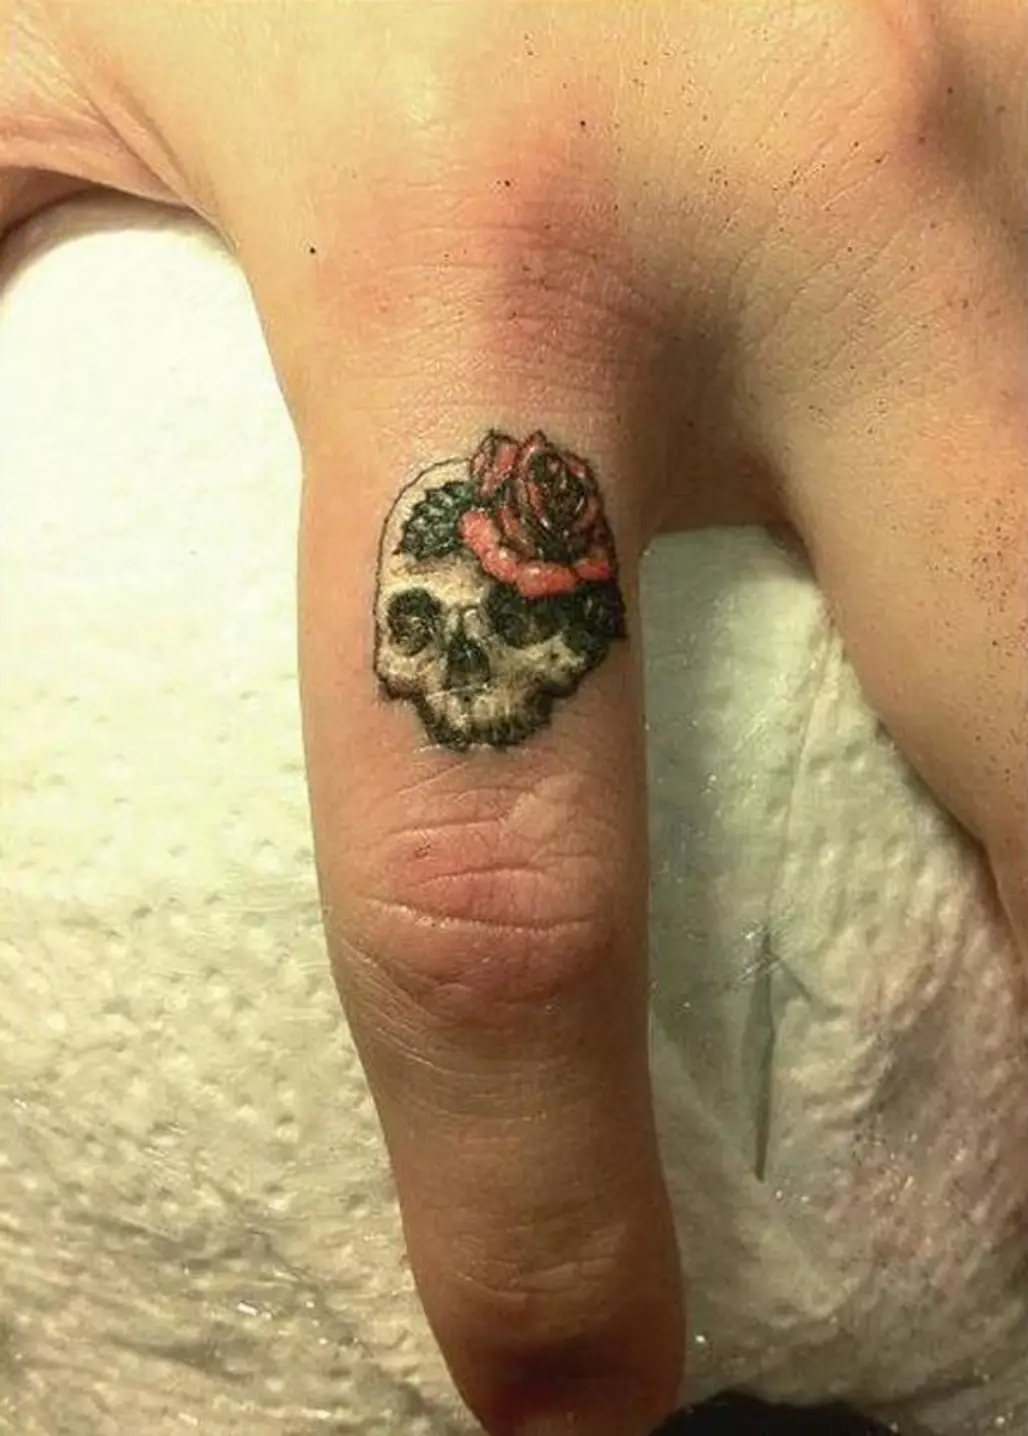 Skull Tattoos - Their Different Meanings (Plus Ideas & Photos)